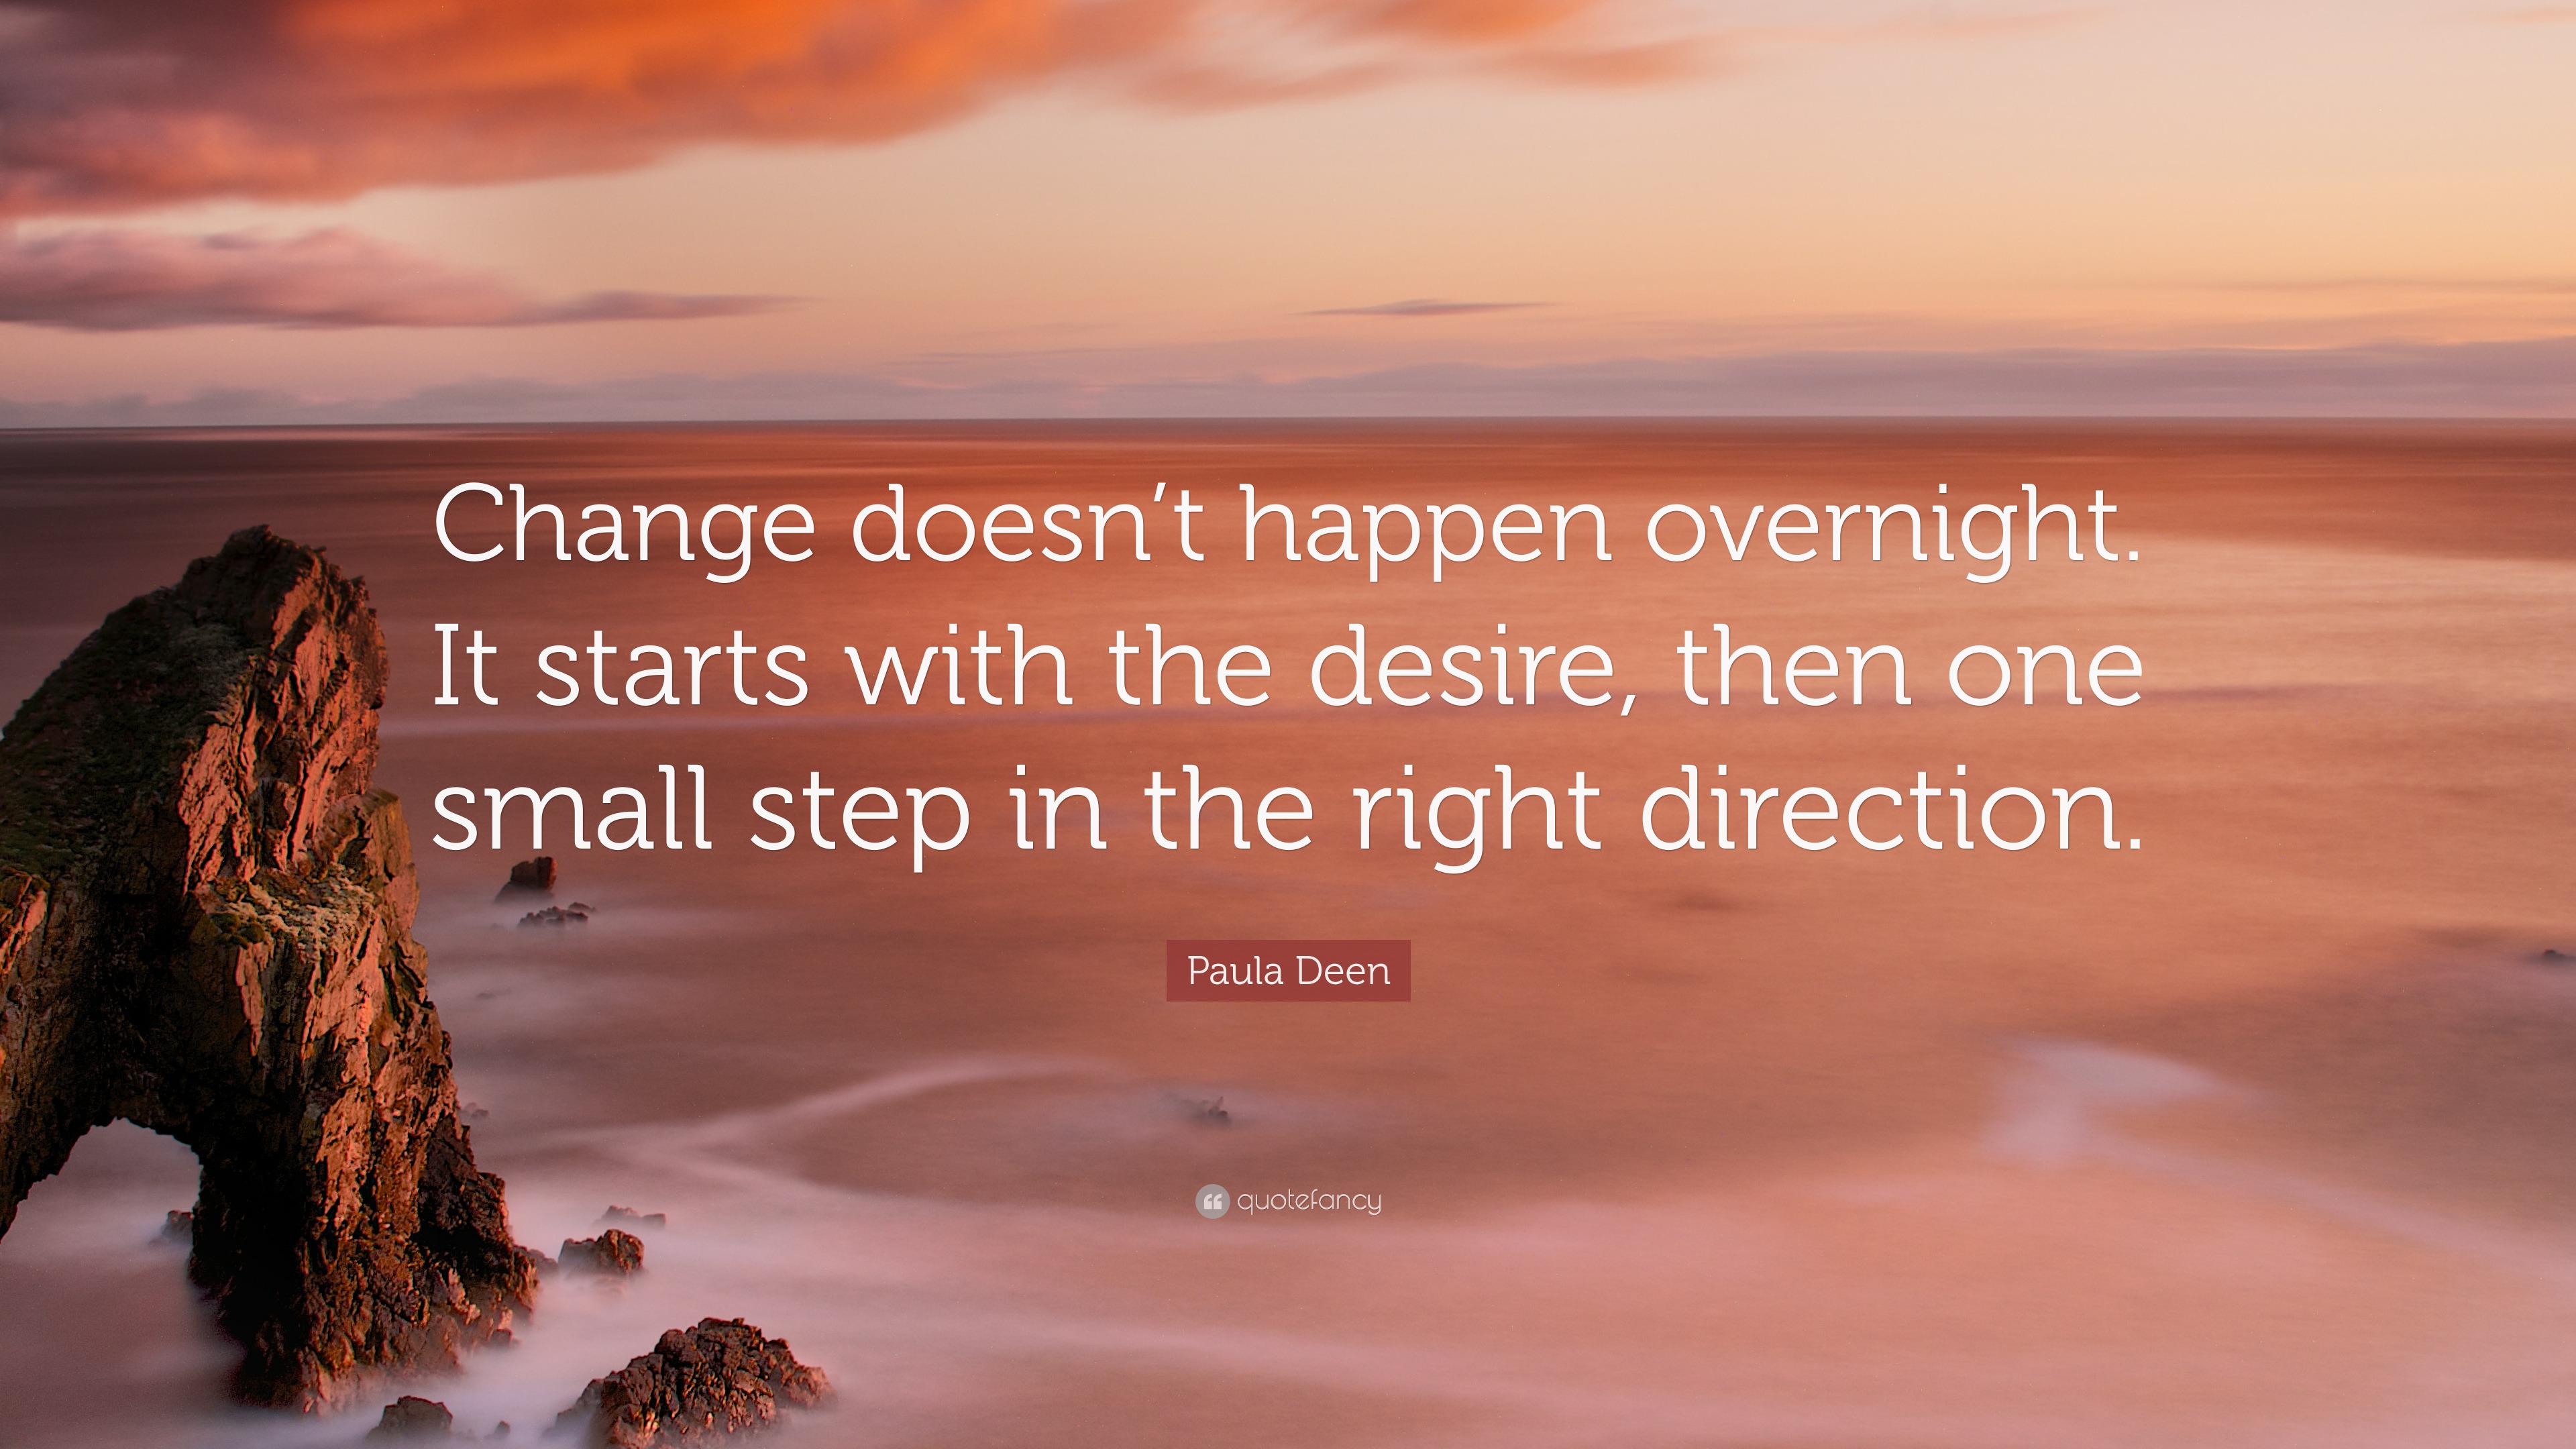 Paula Deen Quote: “Change doesn’t happen overnight. It starts with the ...